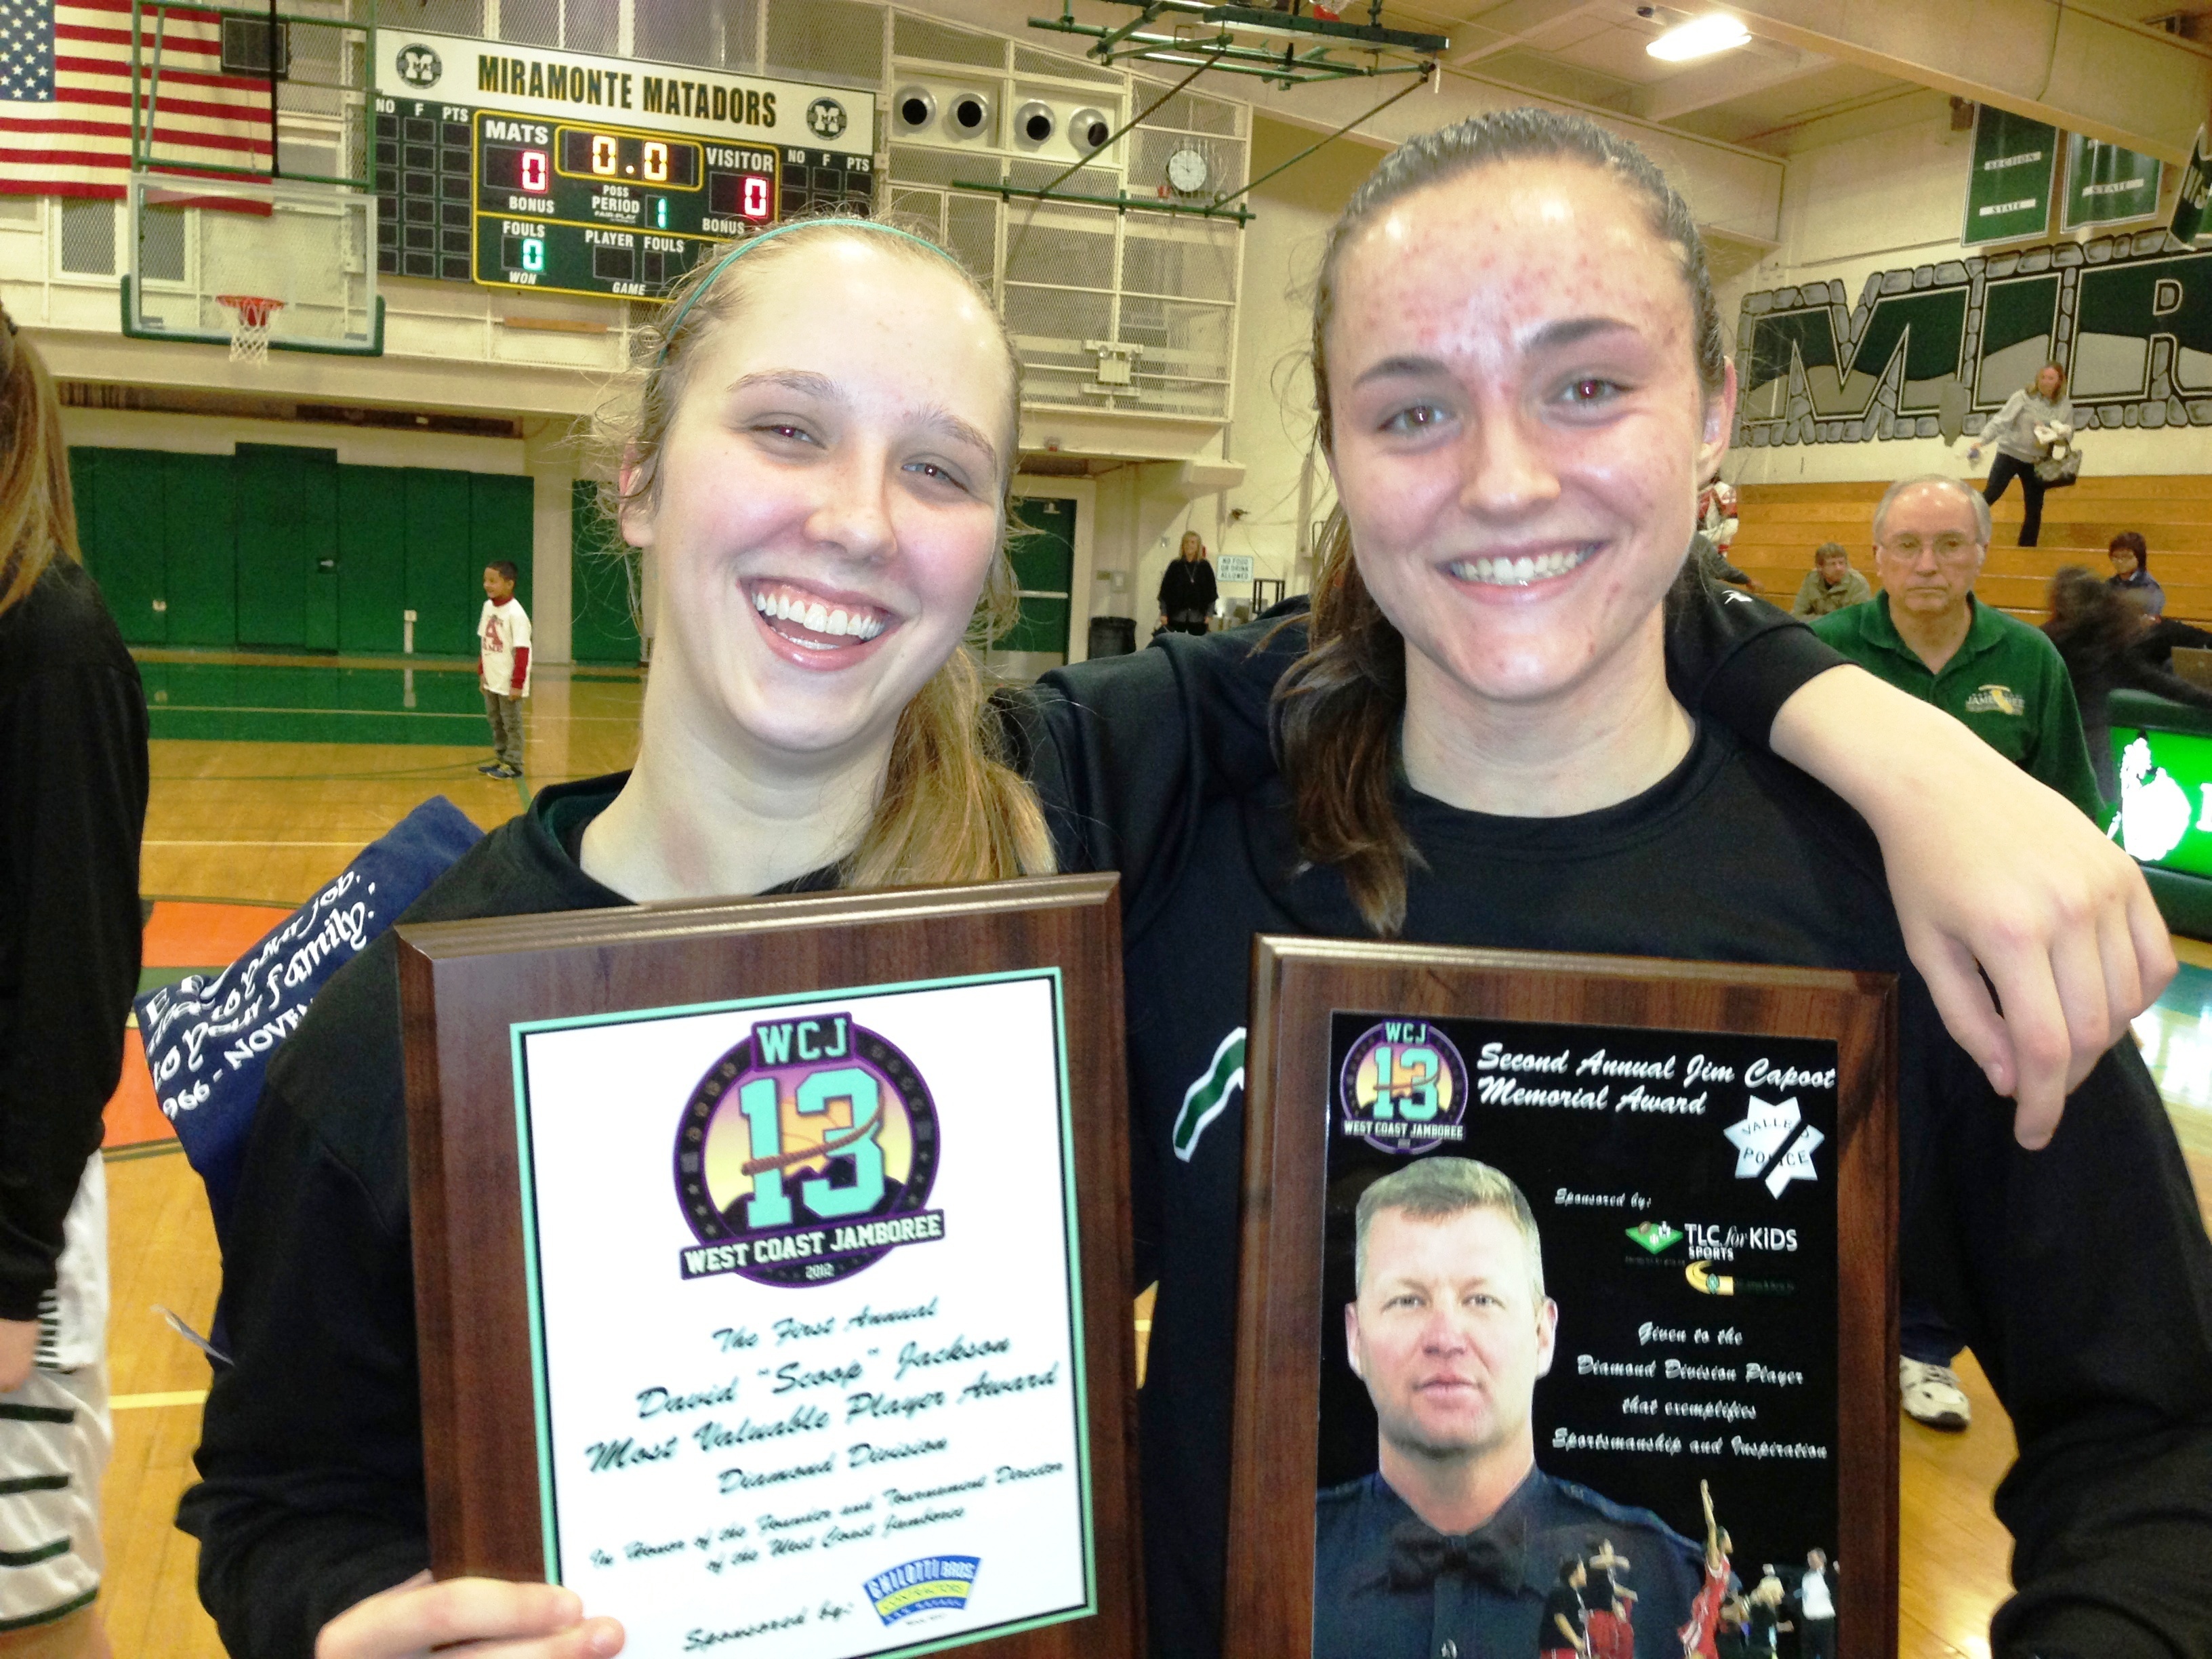 Miramonte's Carly Gill and Megan Reid collected a lot of hardware at the recent West Coast Jamboree and led their team last week to a big win against arch-rival Campolindo. Photo: Harold Abend.